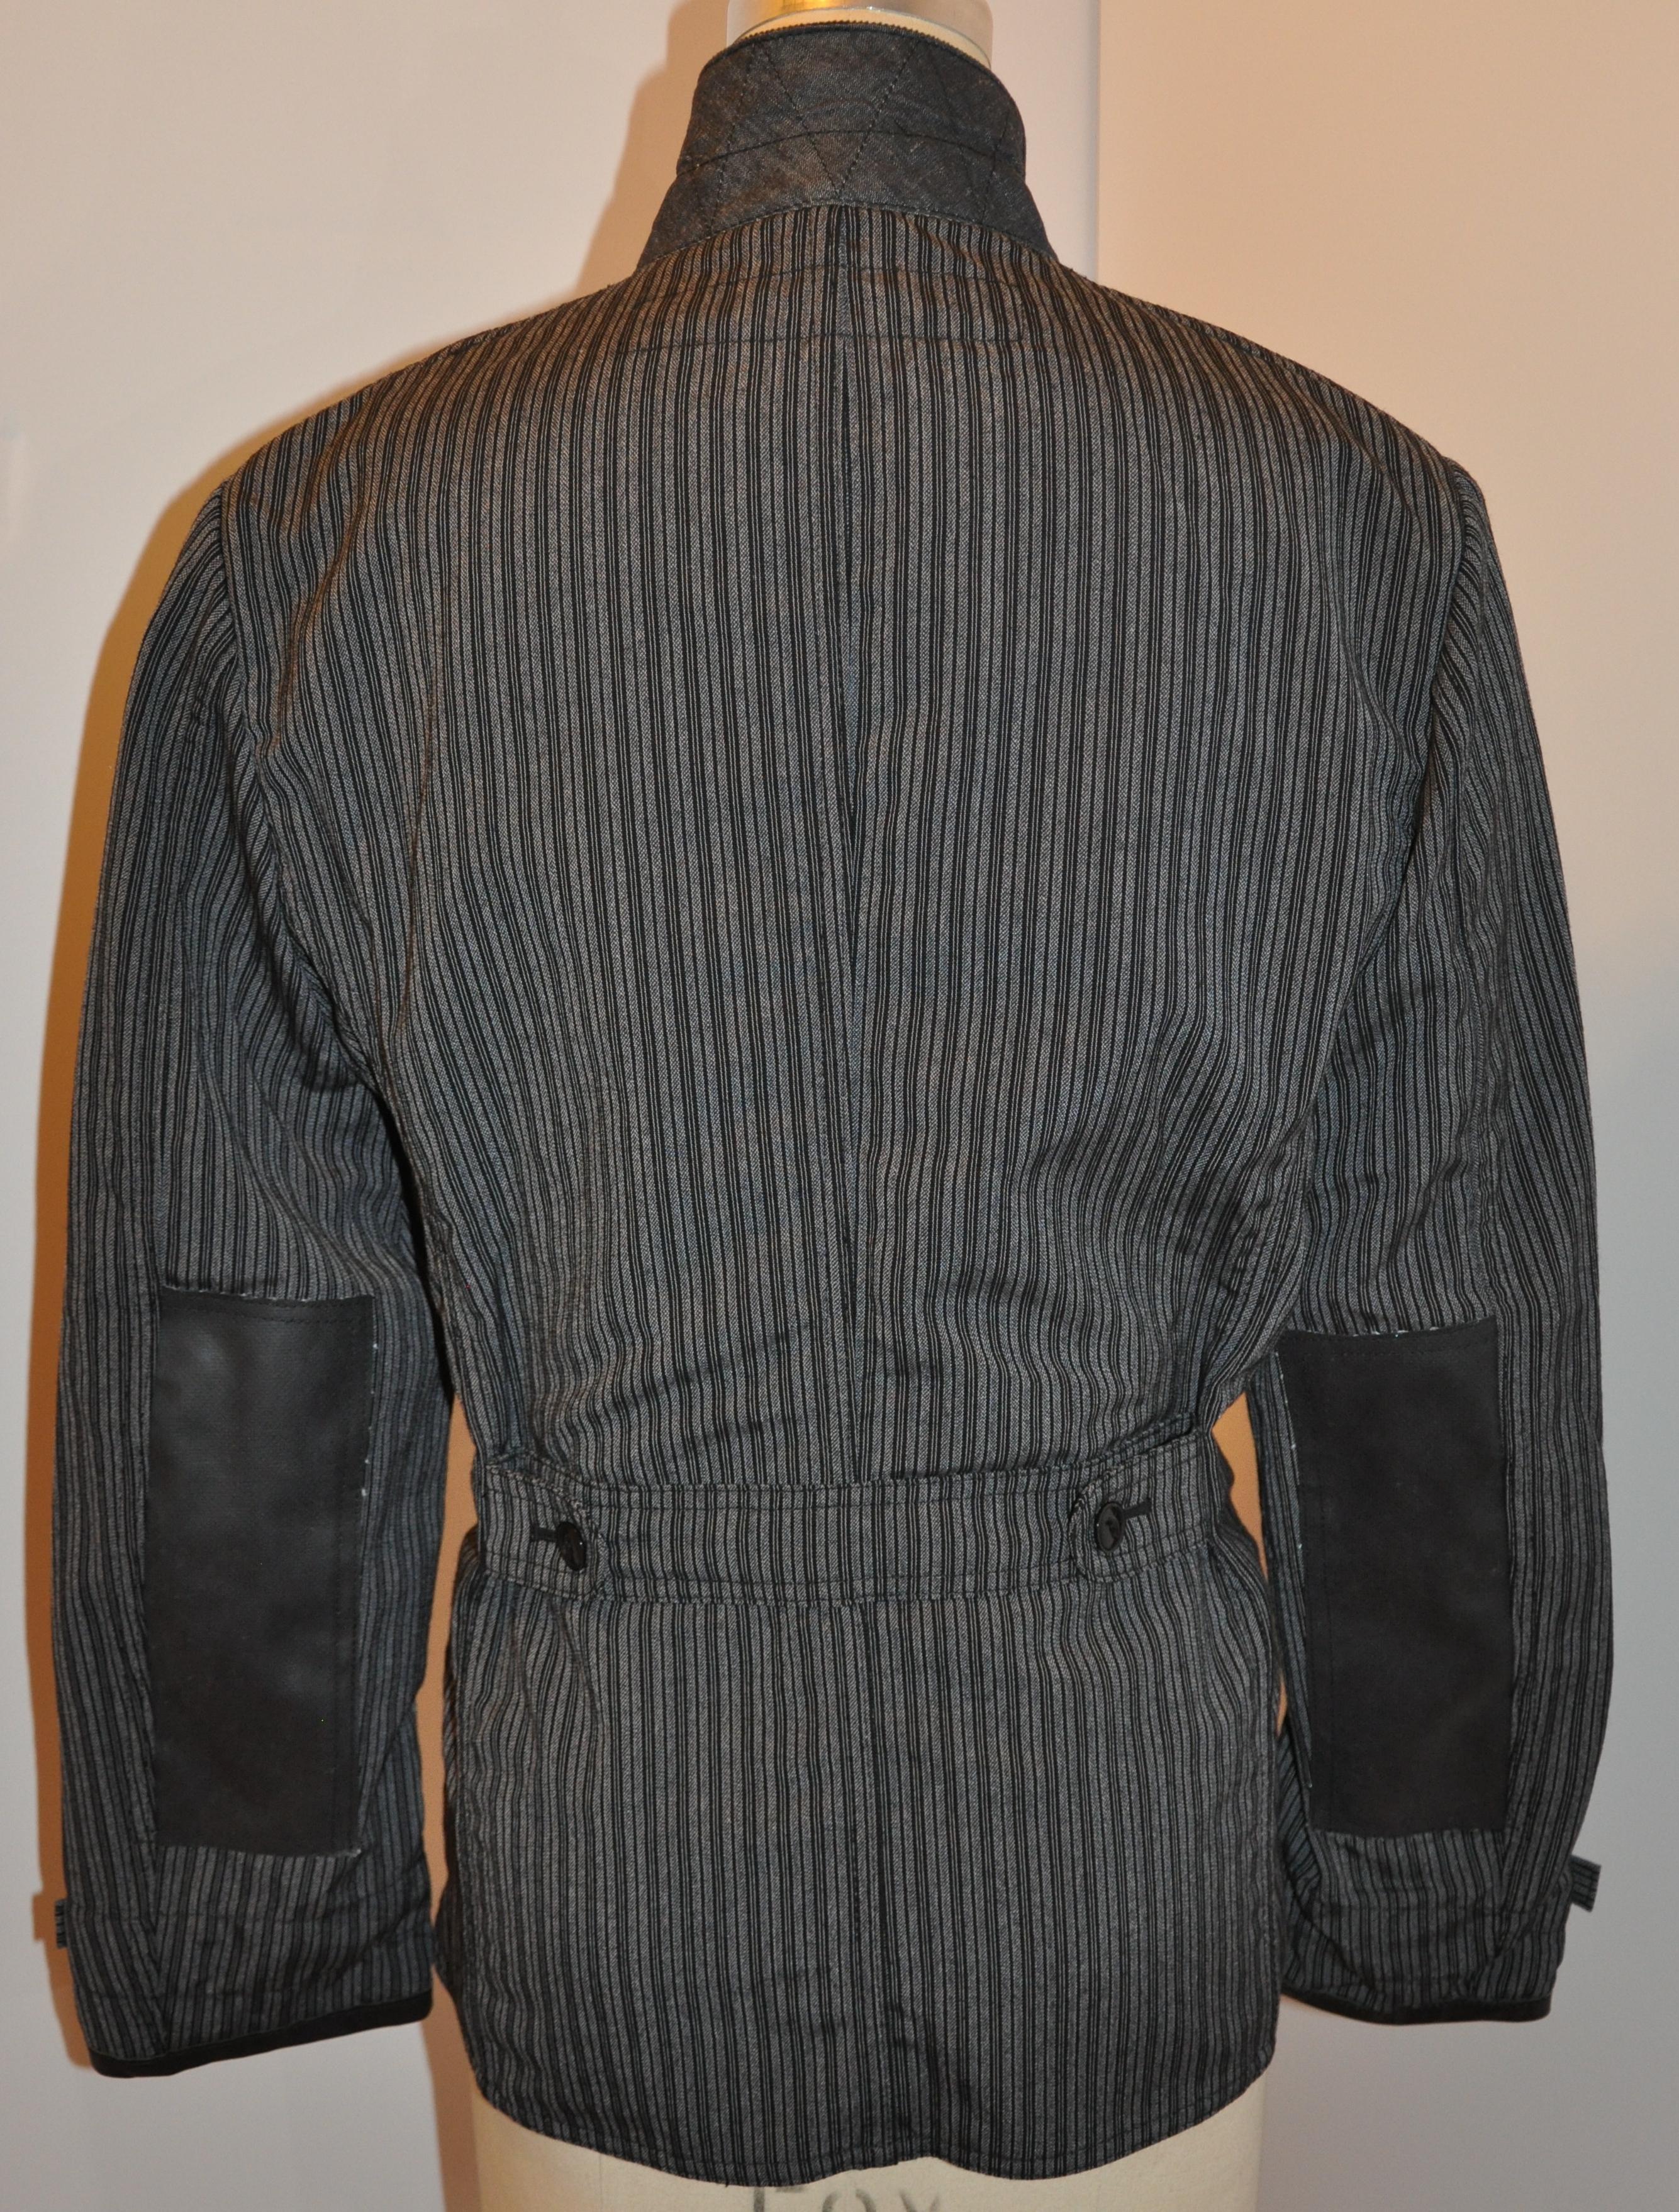 Junya Watanabe Comme des Garcons Black & Charcoal Stripe Deconstruct Jacket In Good Condition For Sale In New York, NY